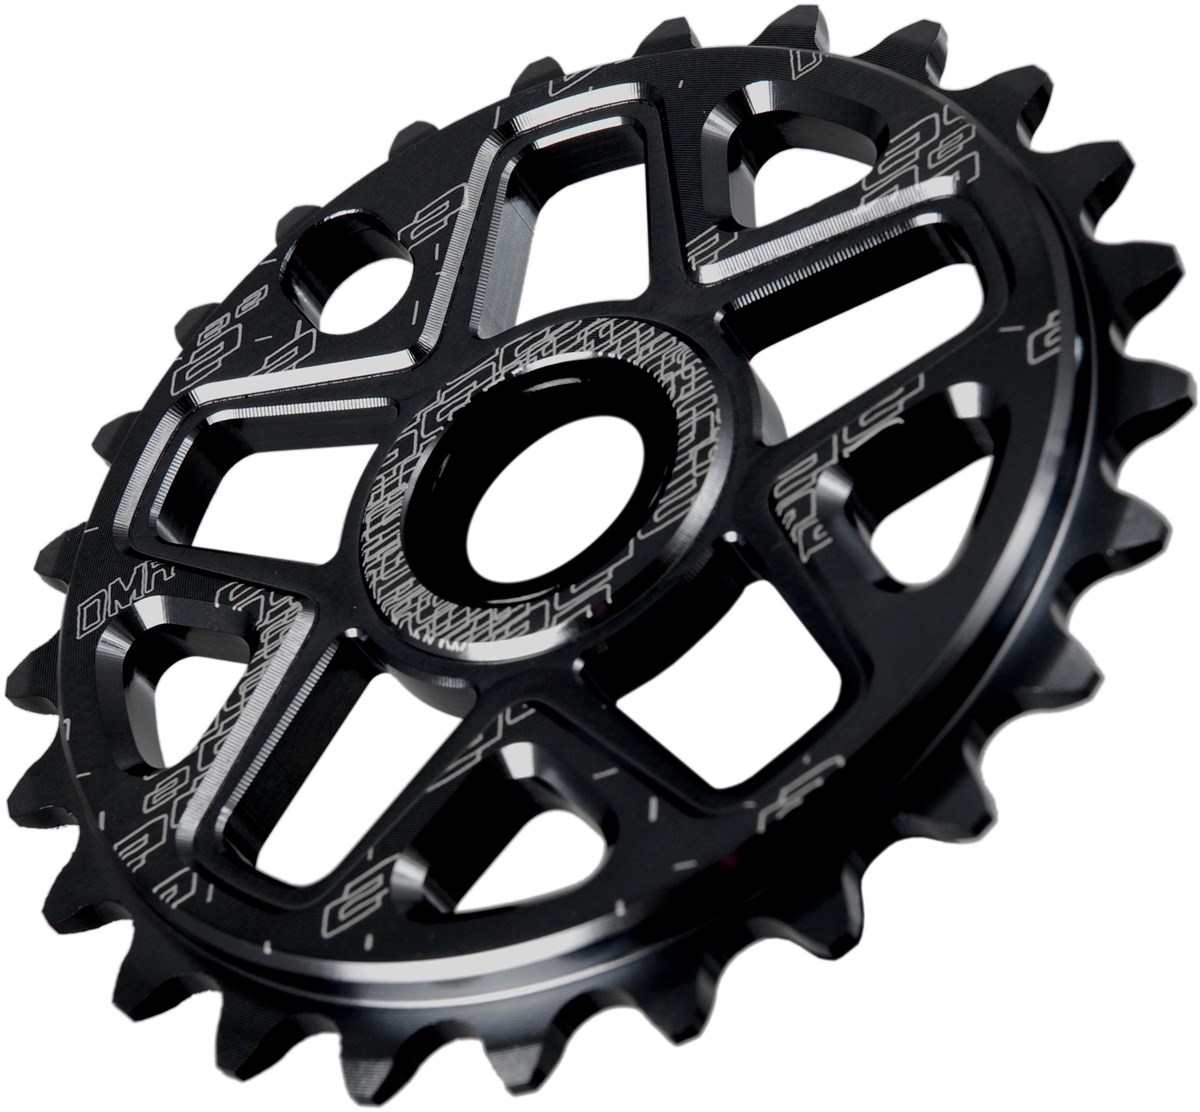 DMR Spin Chain Rings product image